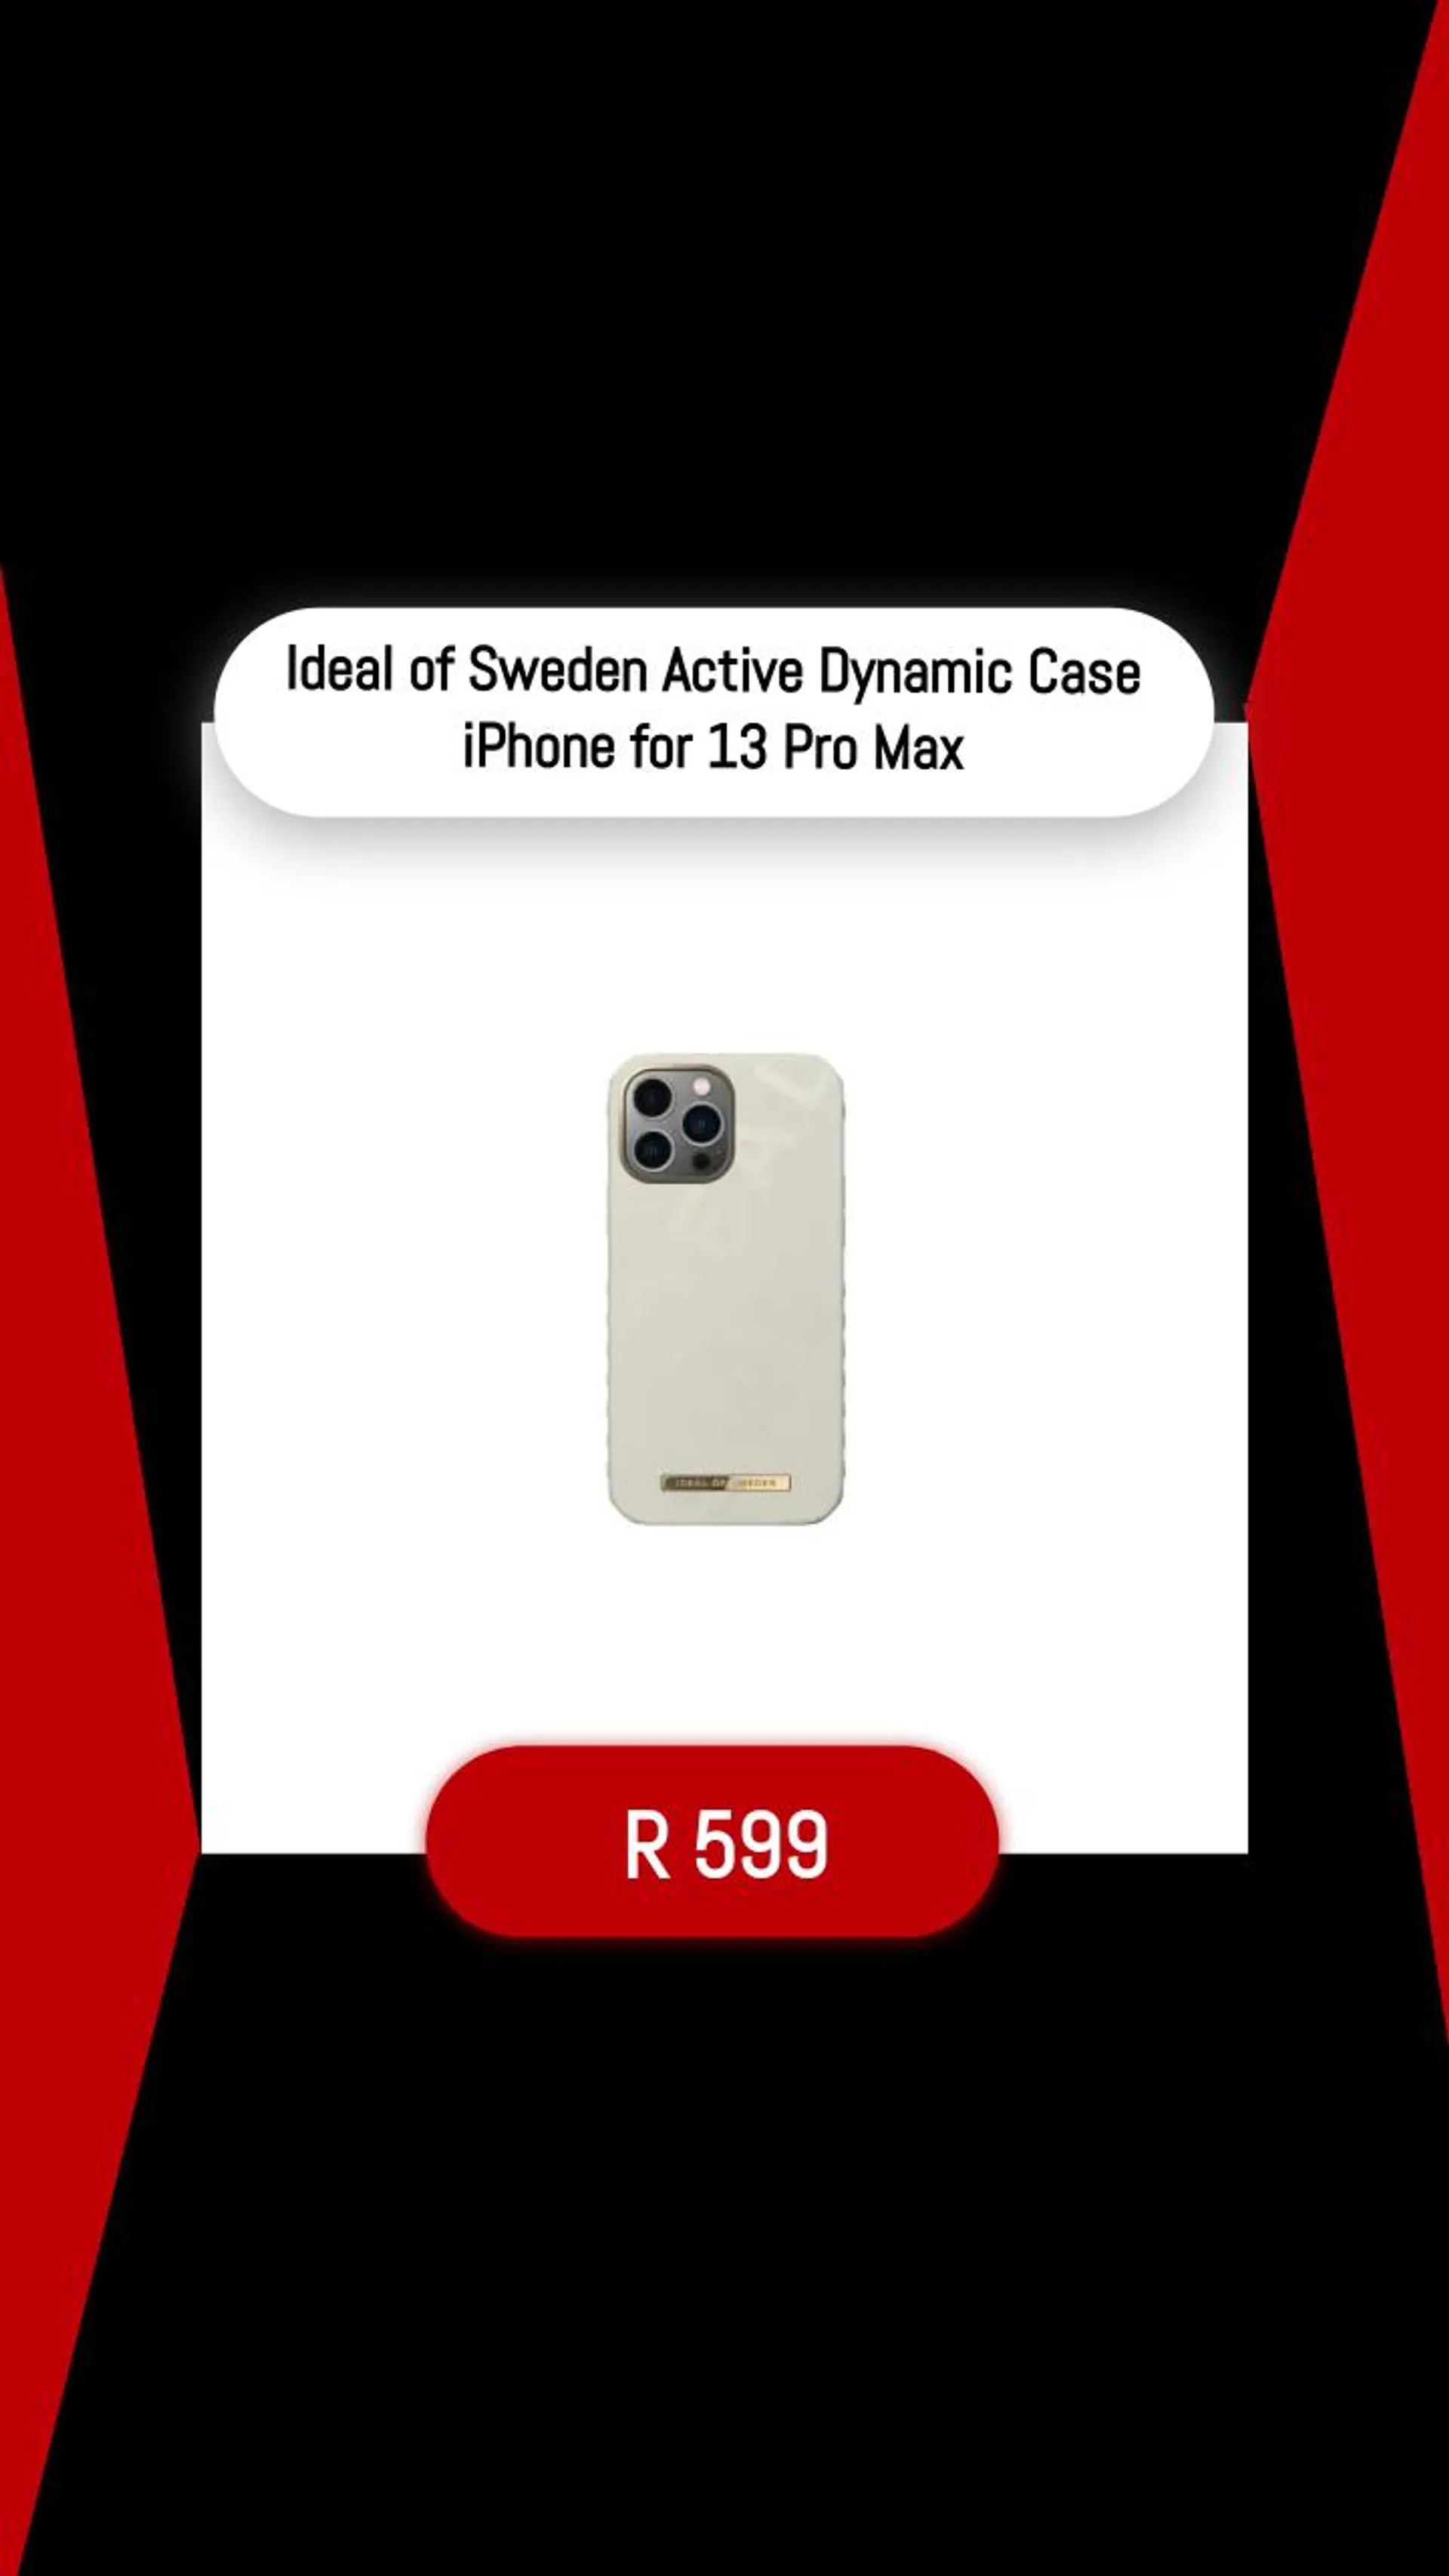 Ideal of Sweden Active Dynamic Case iPhone for 13 Pro Max